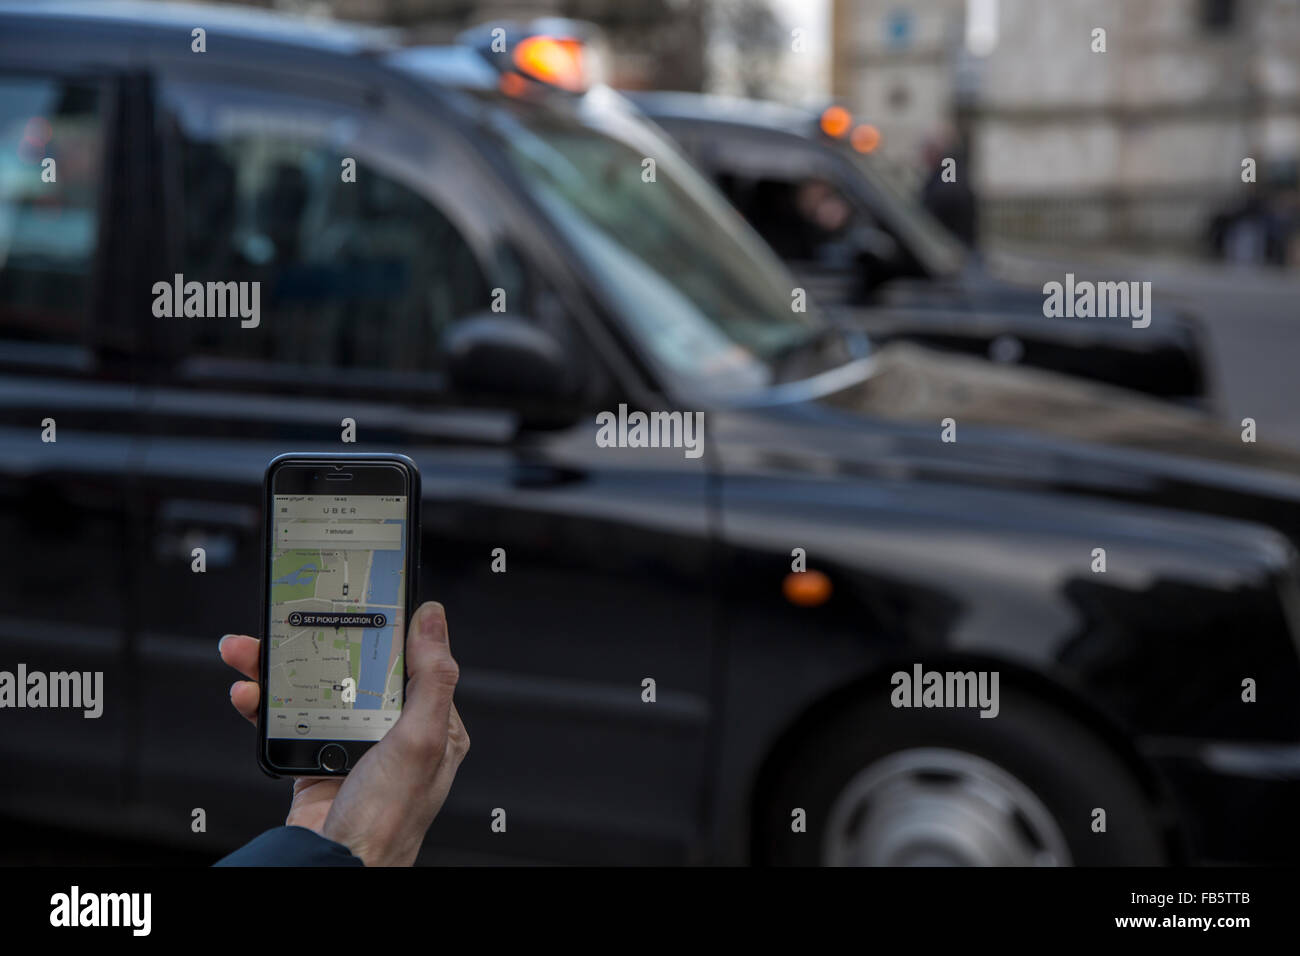 Uber App on Mobile with London Black Cabs in background Stock Photo